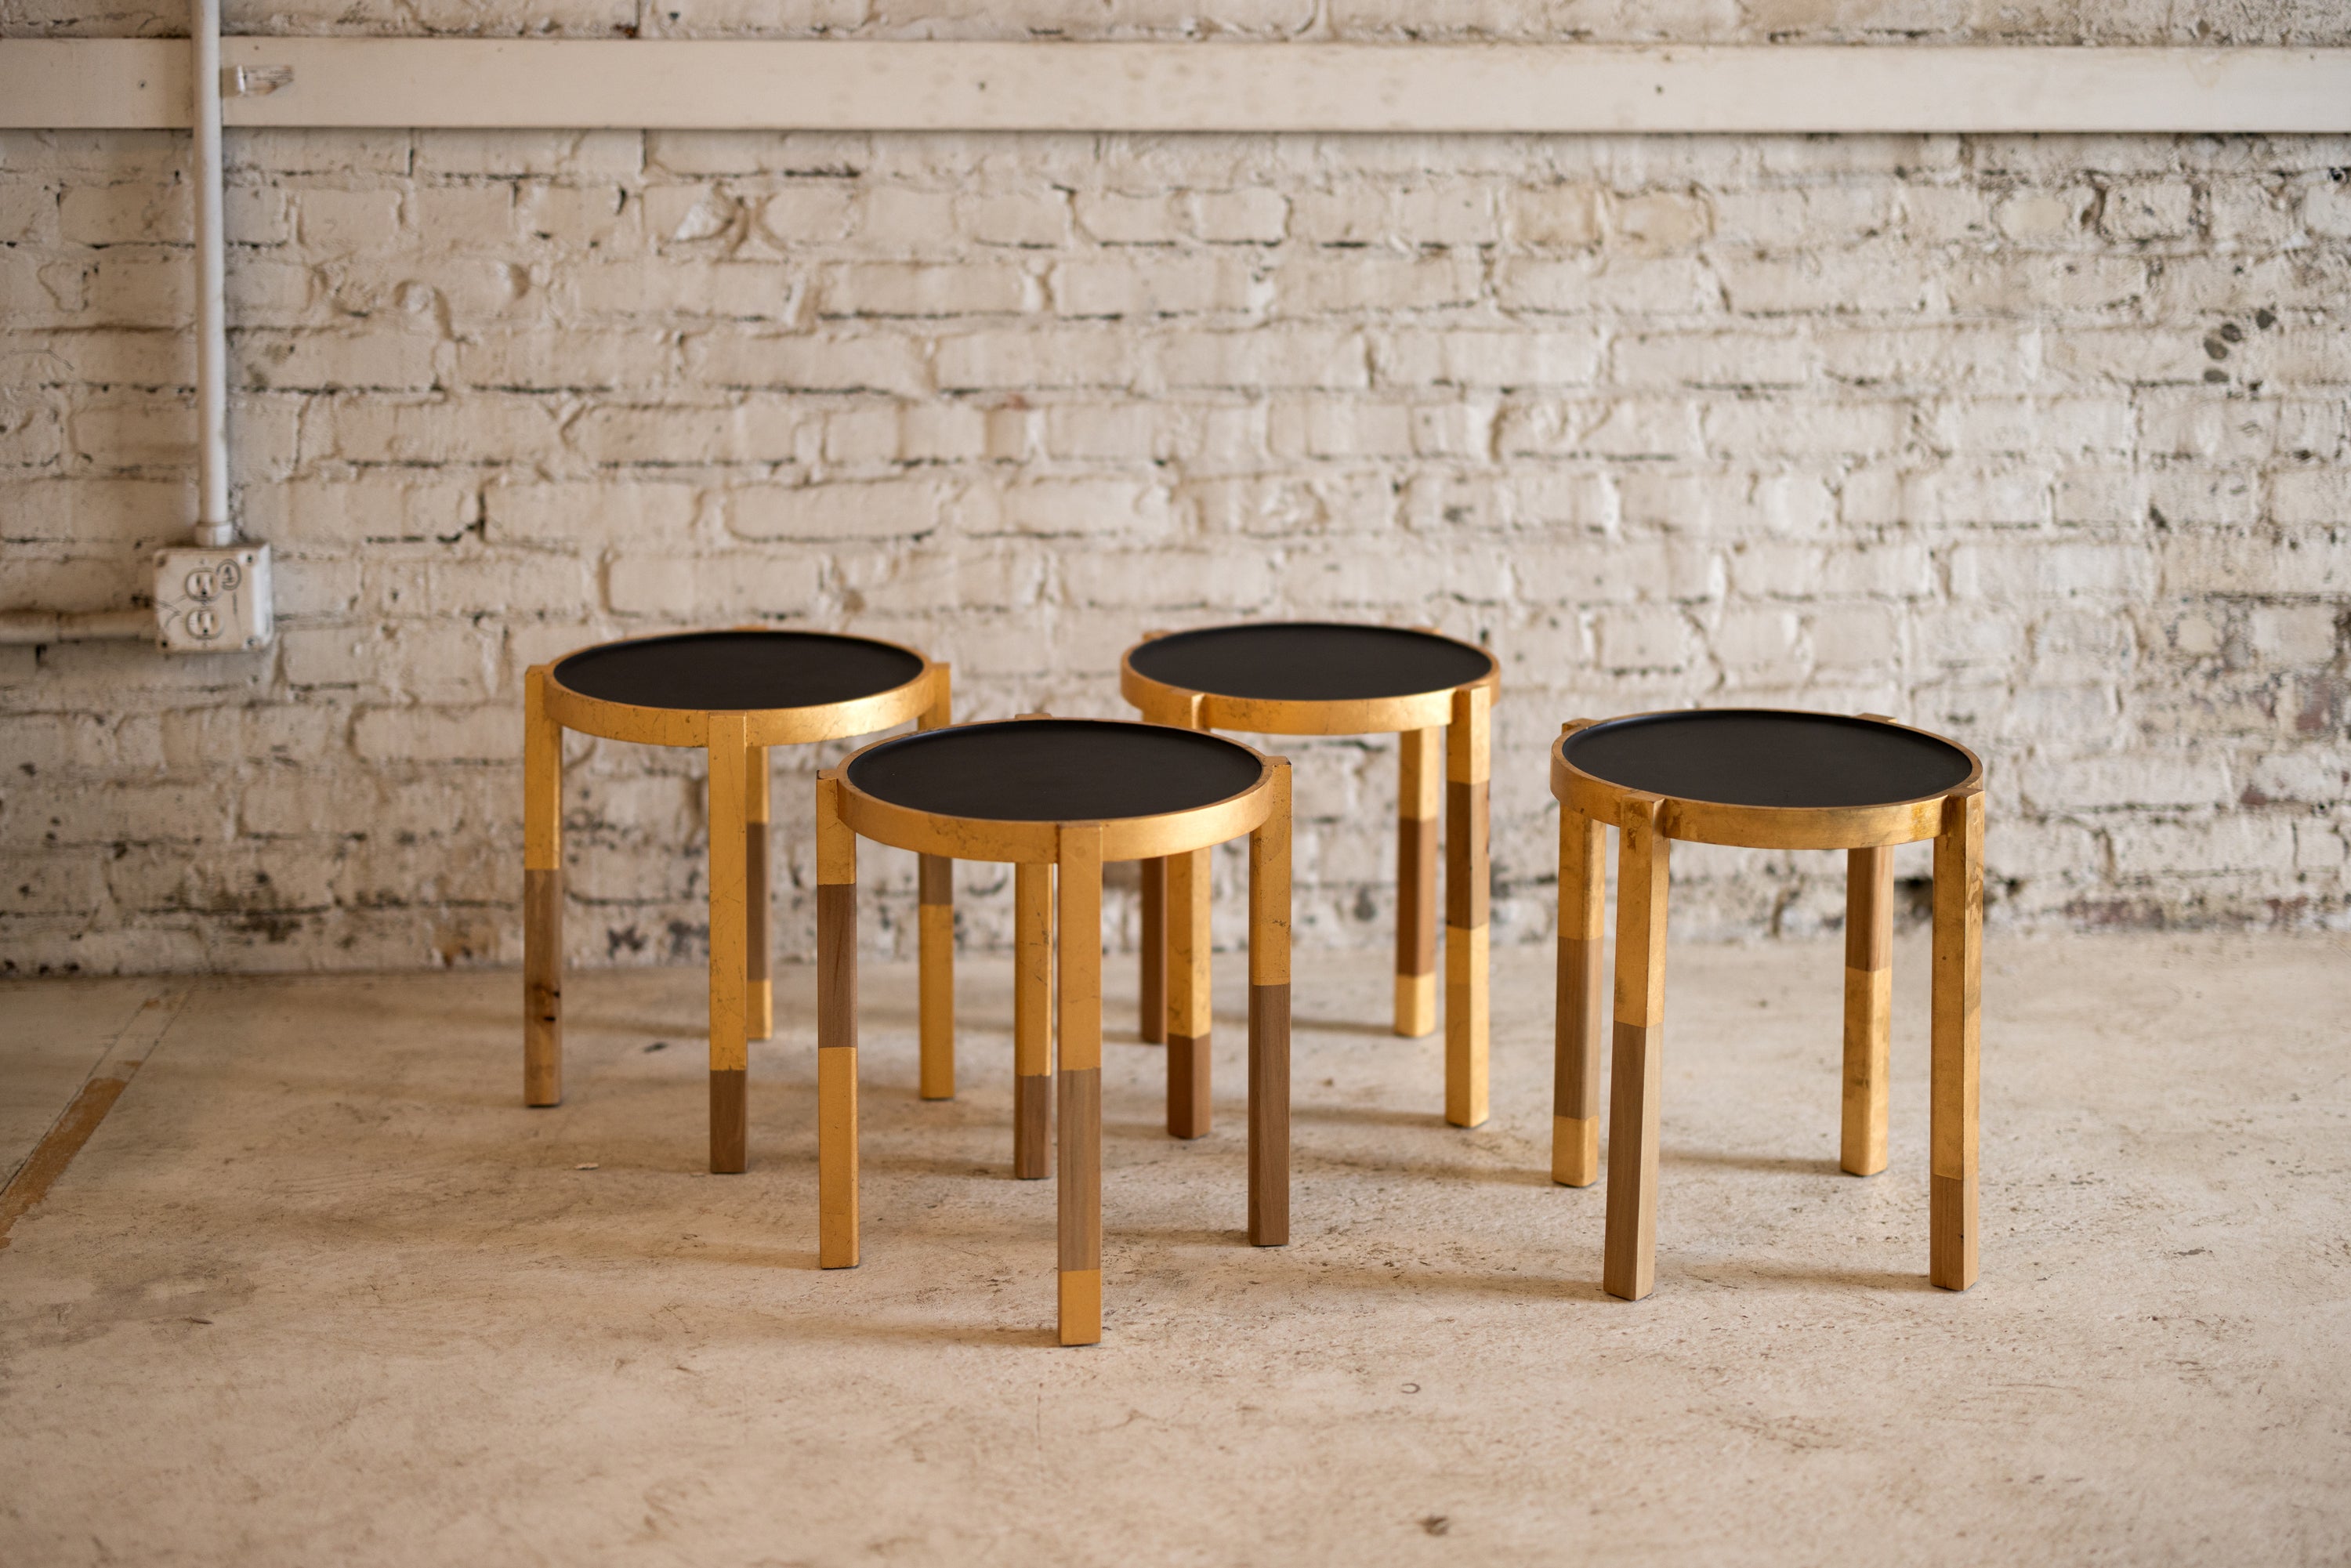 Small Matte Black, Gold Leaf and Wood make this unique small batch of Waverly side tables. Small, round, lightweight with curves you want to touch, this versatile end table is made of the finest repurposed urban timber. A natural wood finish on